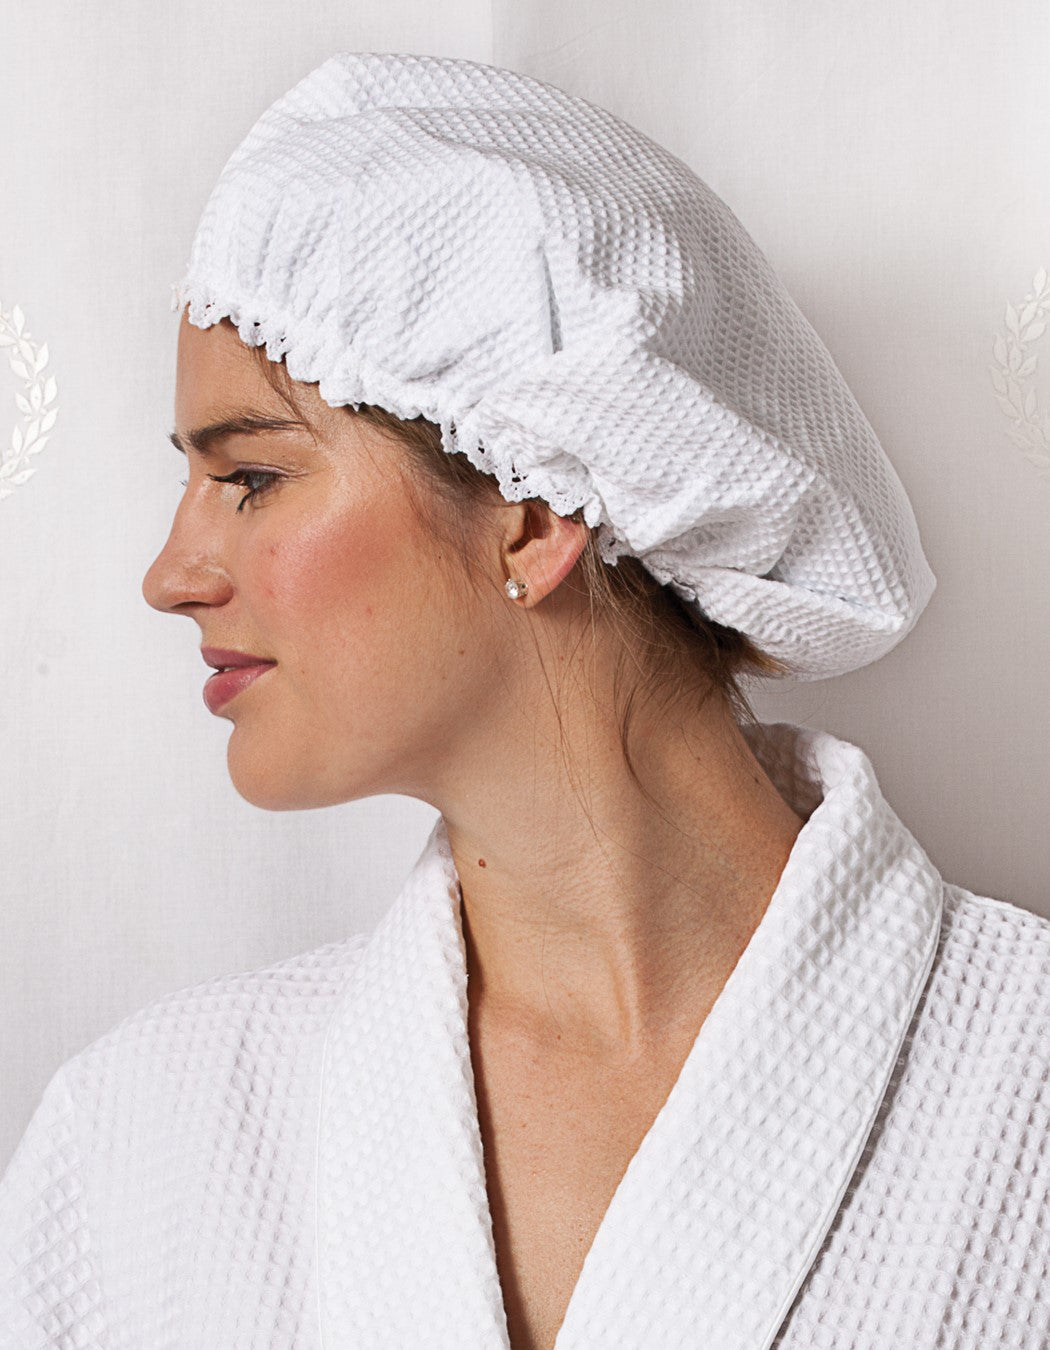 Shower Cap, White Cotton Waffle Weave, No Embroidery